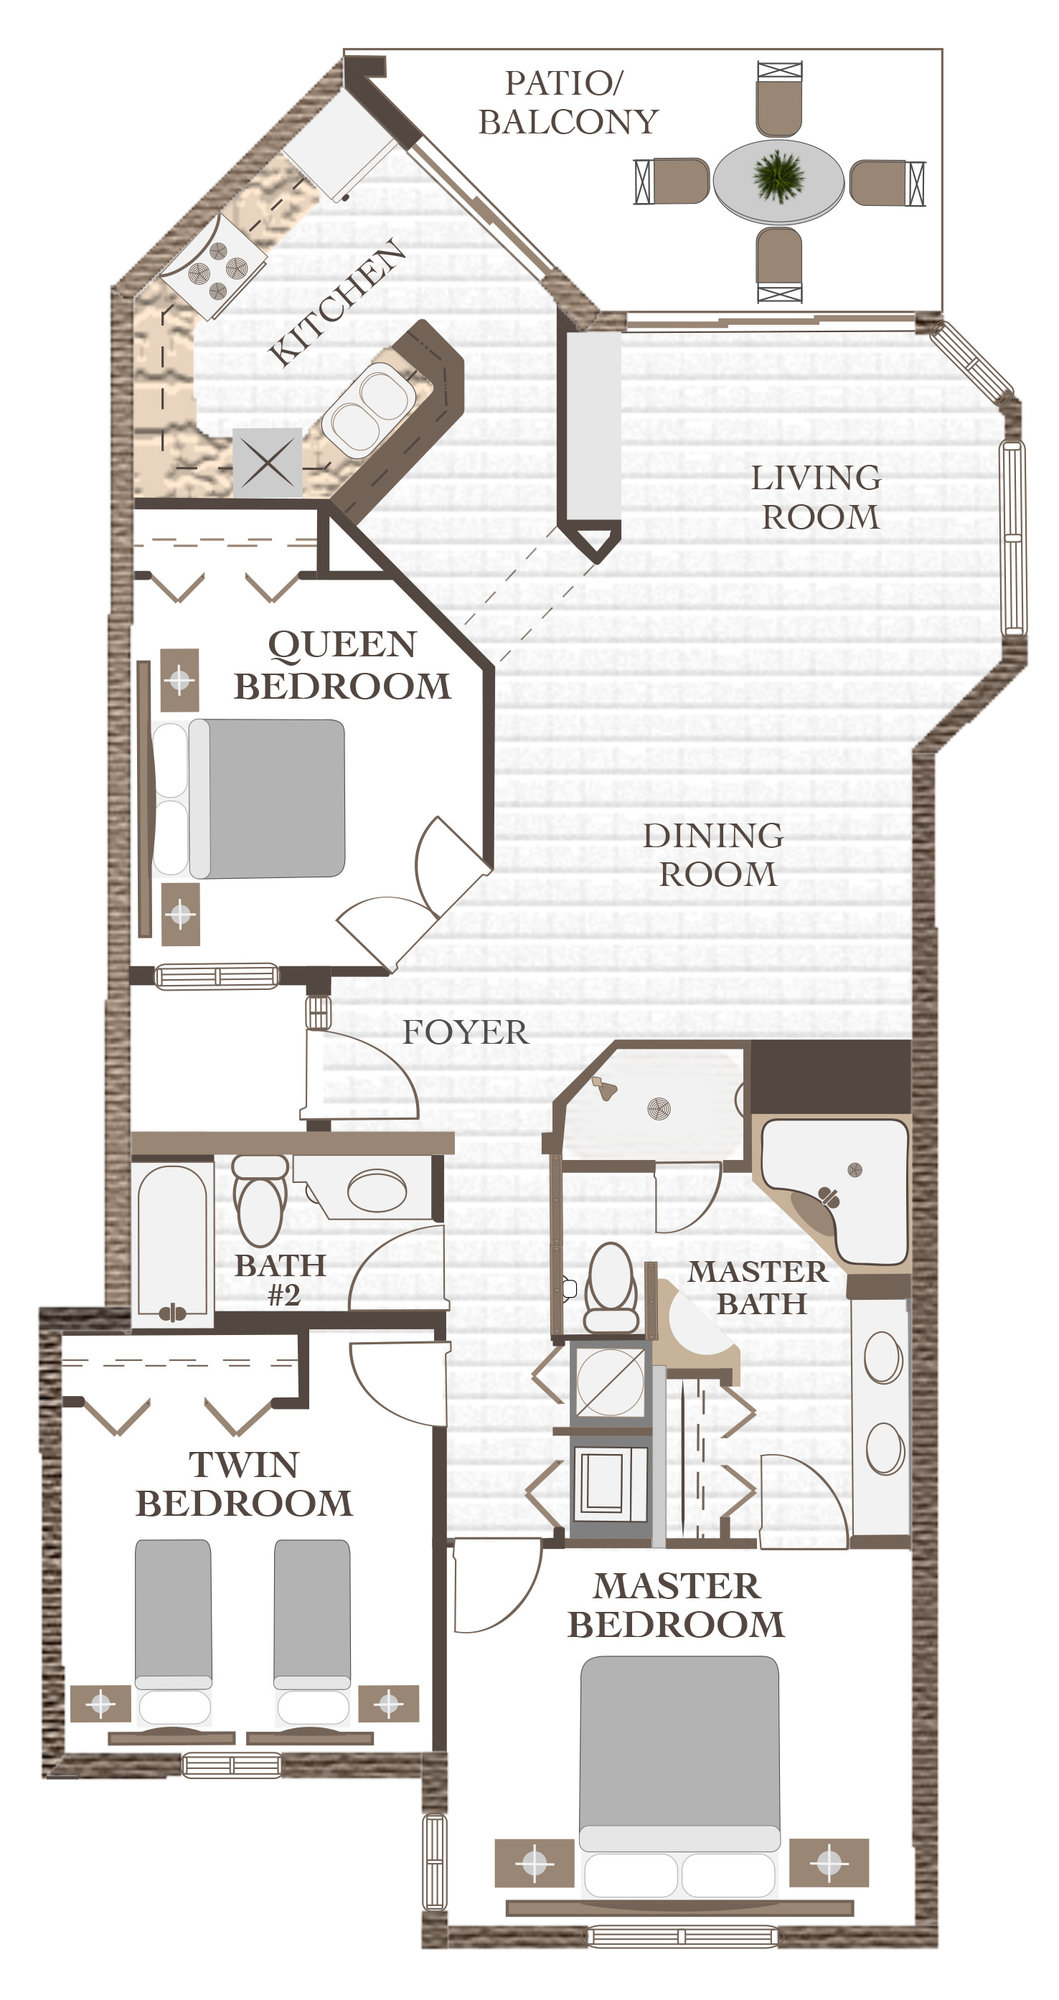 3 bed 2 bath opt two 1421 sq ft WorldQuest